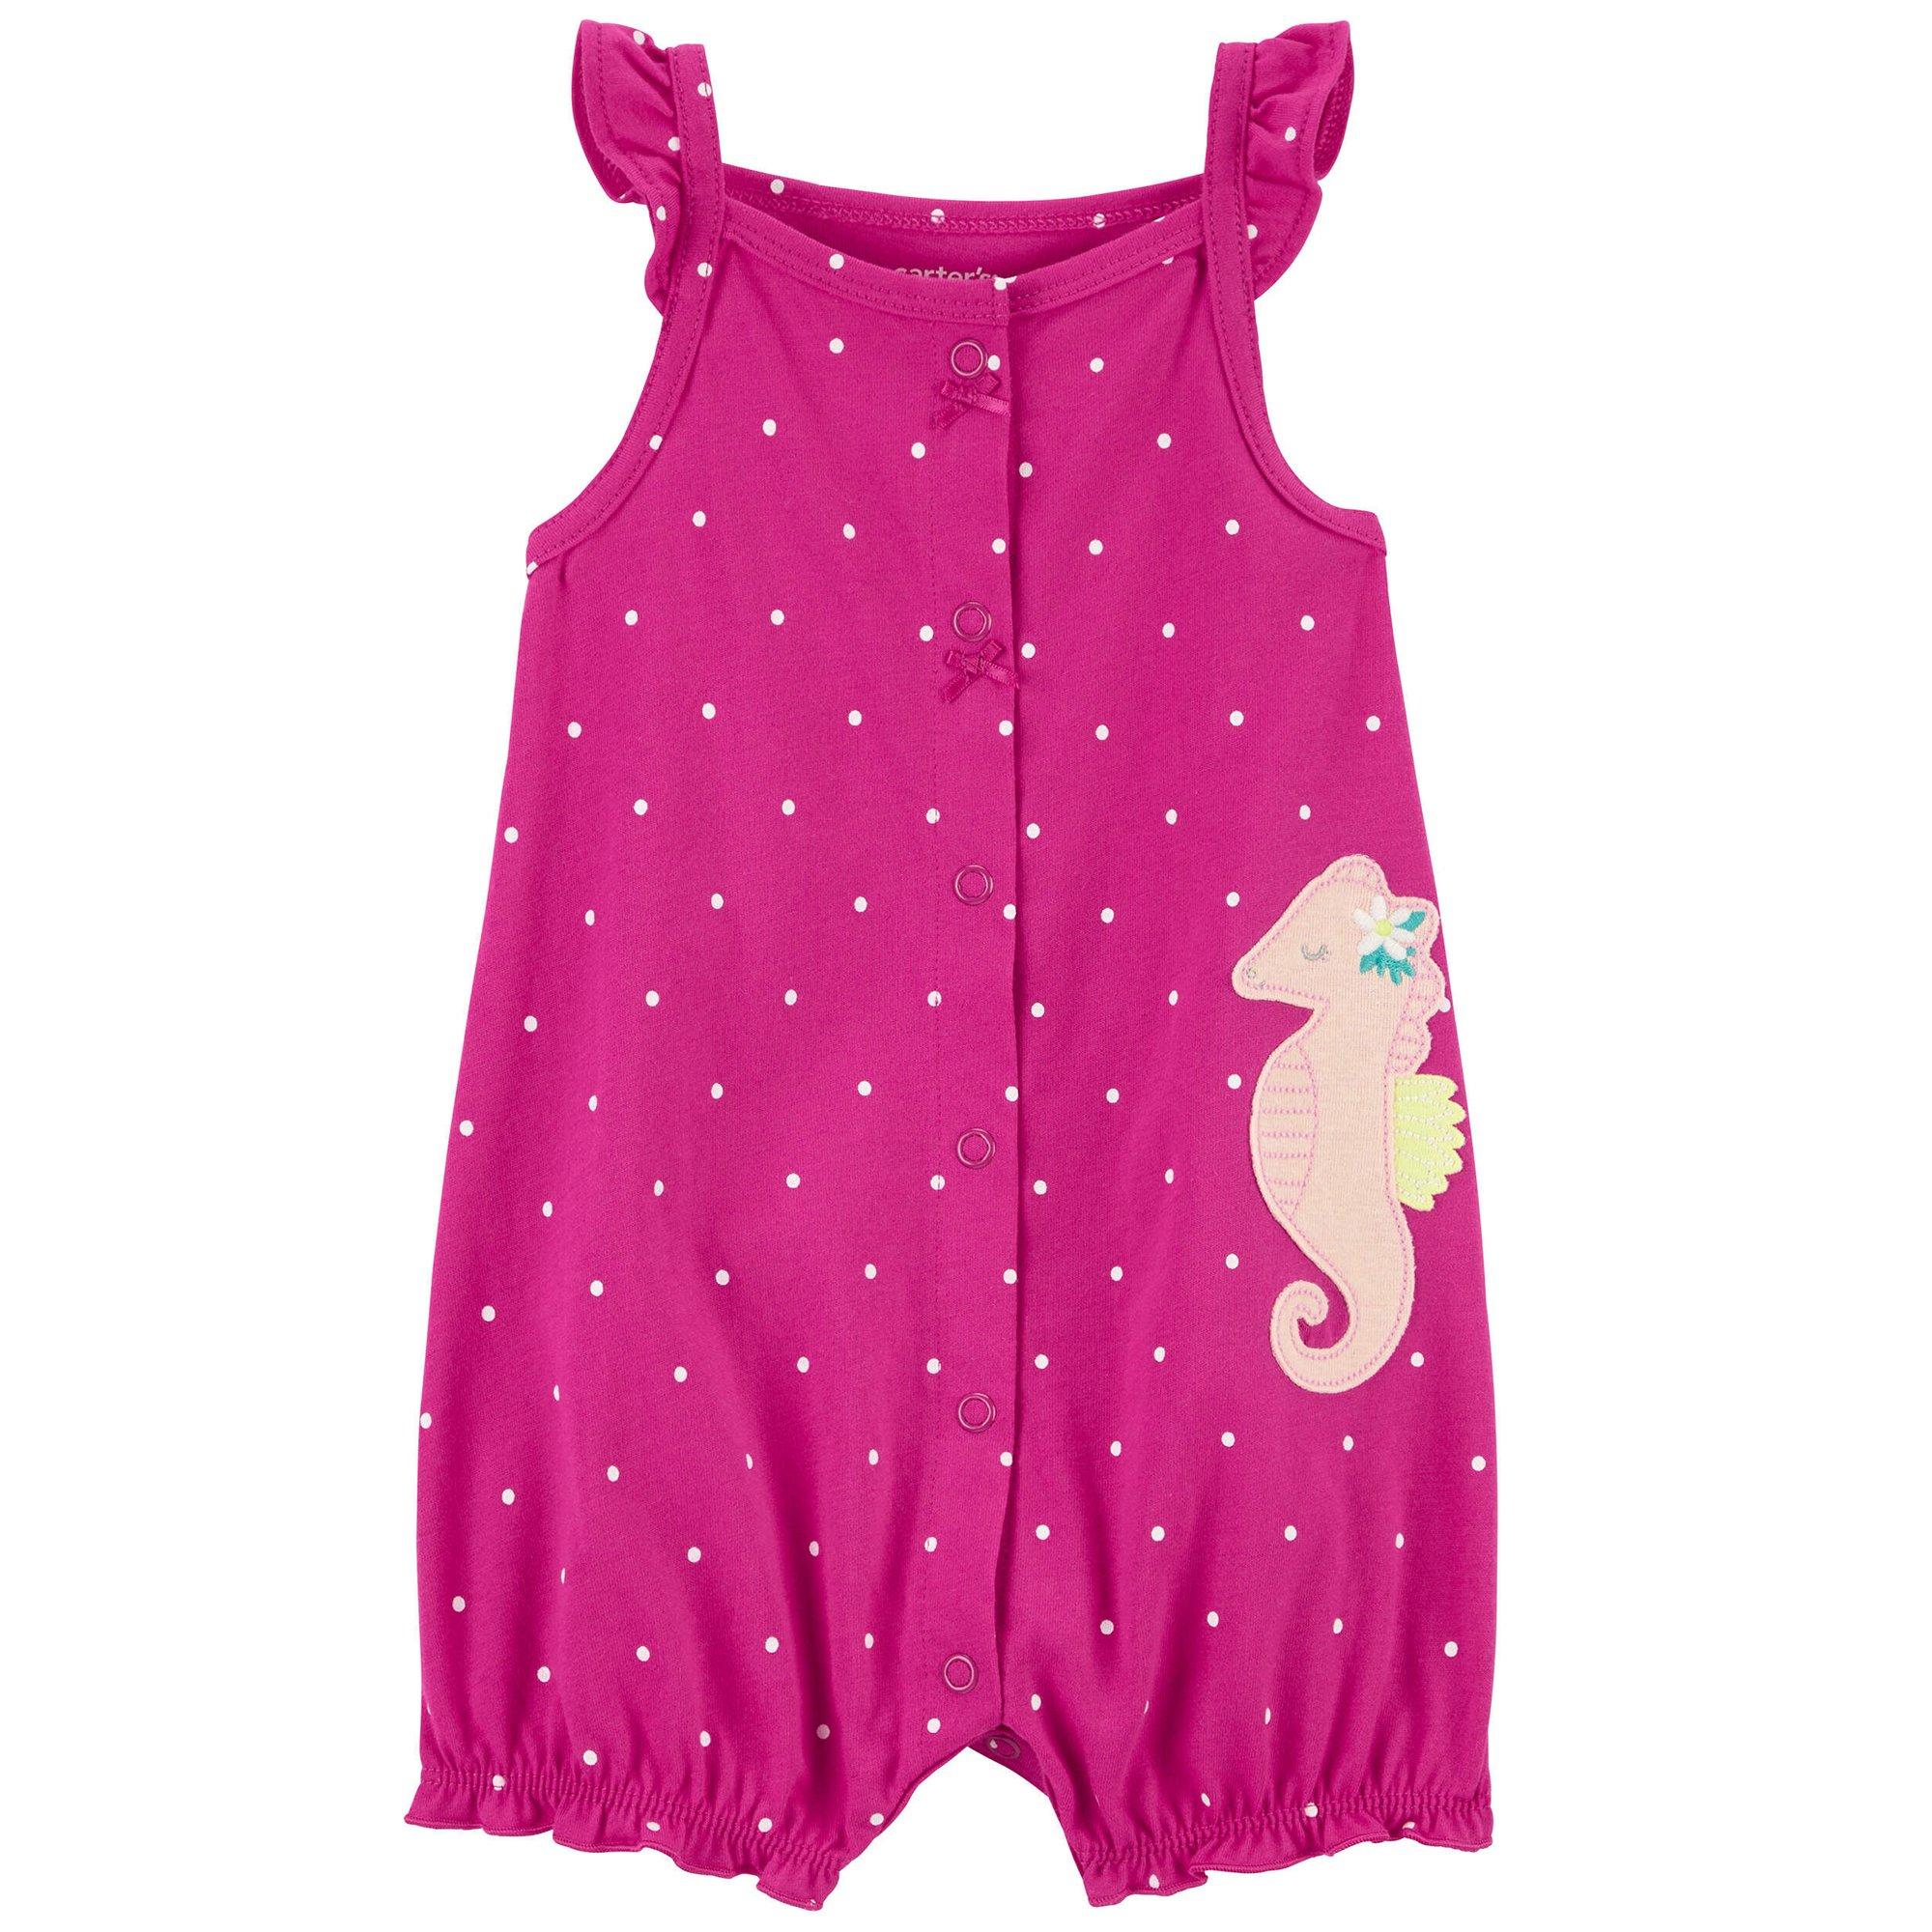 Carters Baby Girls Seahorse Snap-Up Cotton Romper